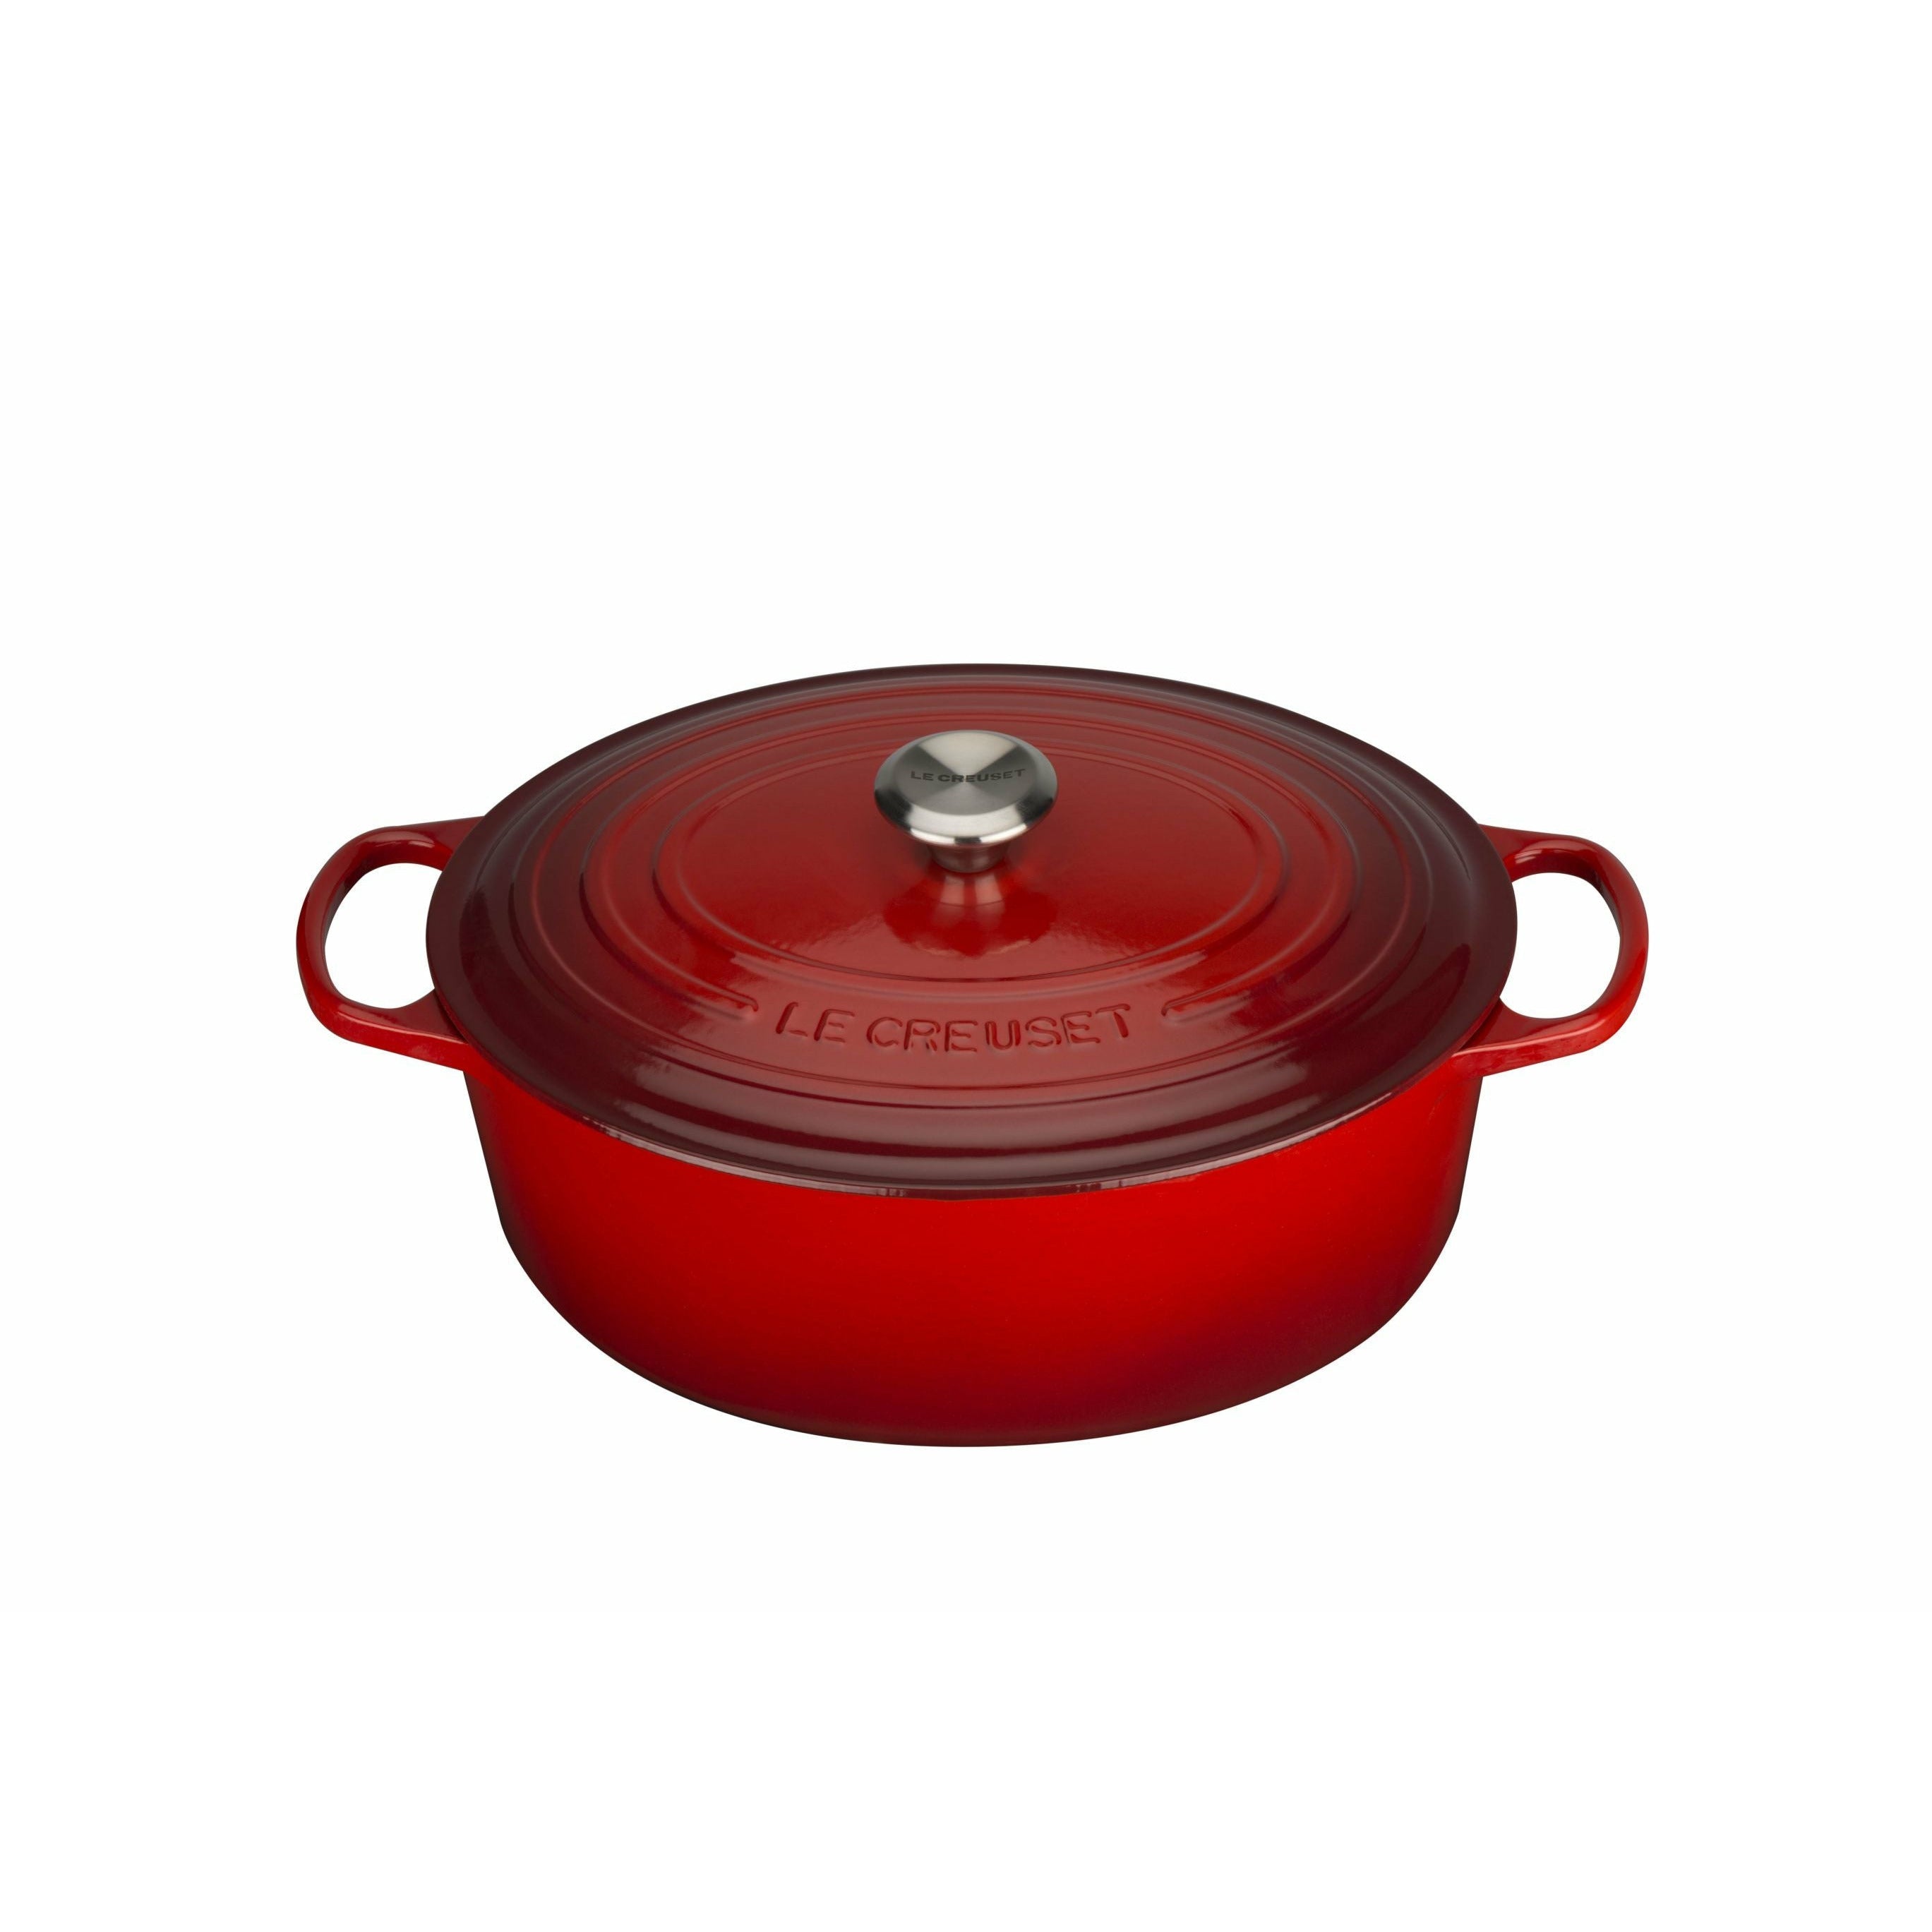 Le Creuset Signature Oval Roaster 33 Cm, Cherry Red